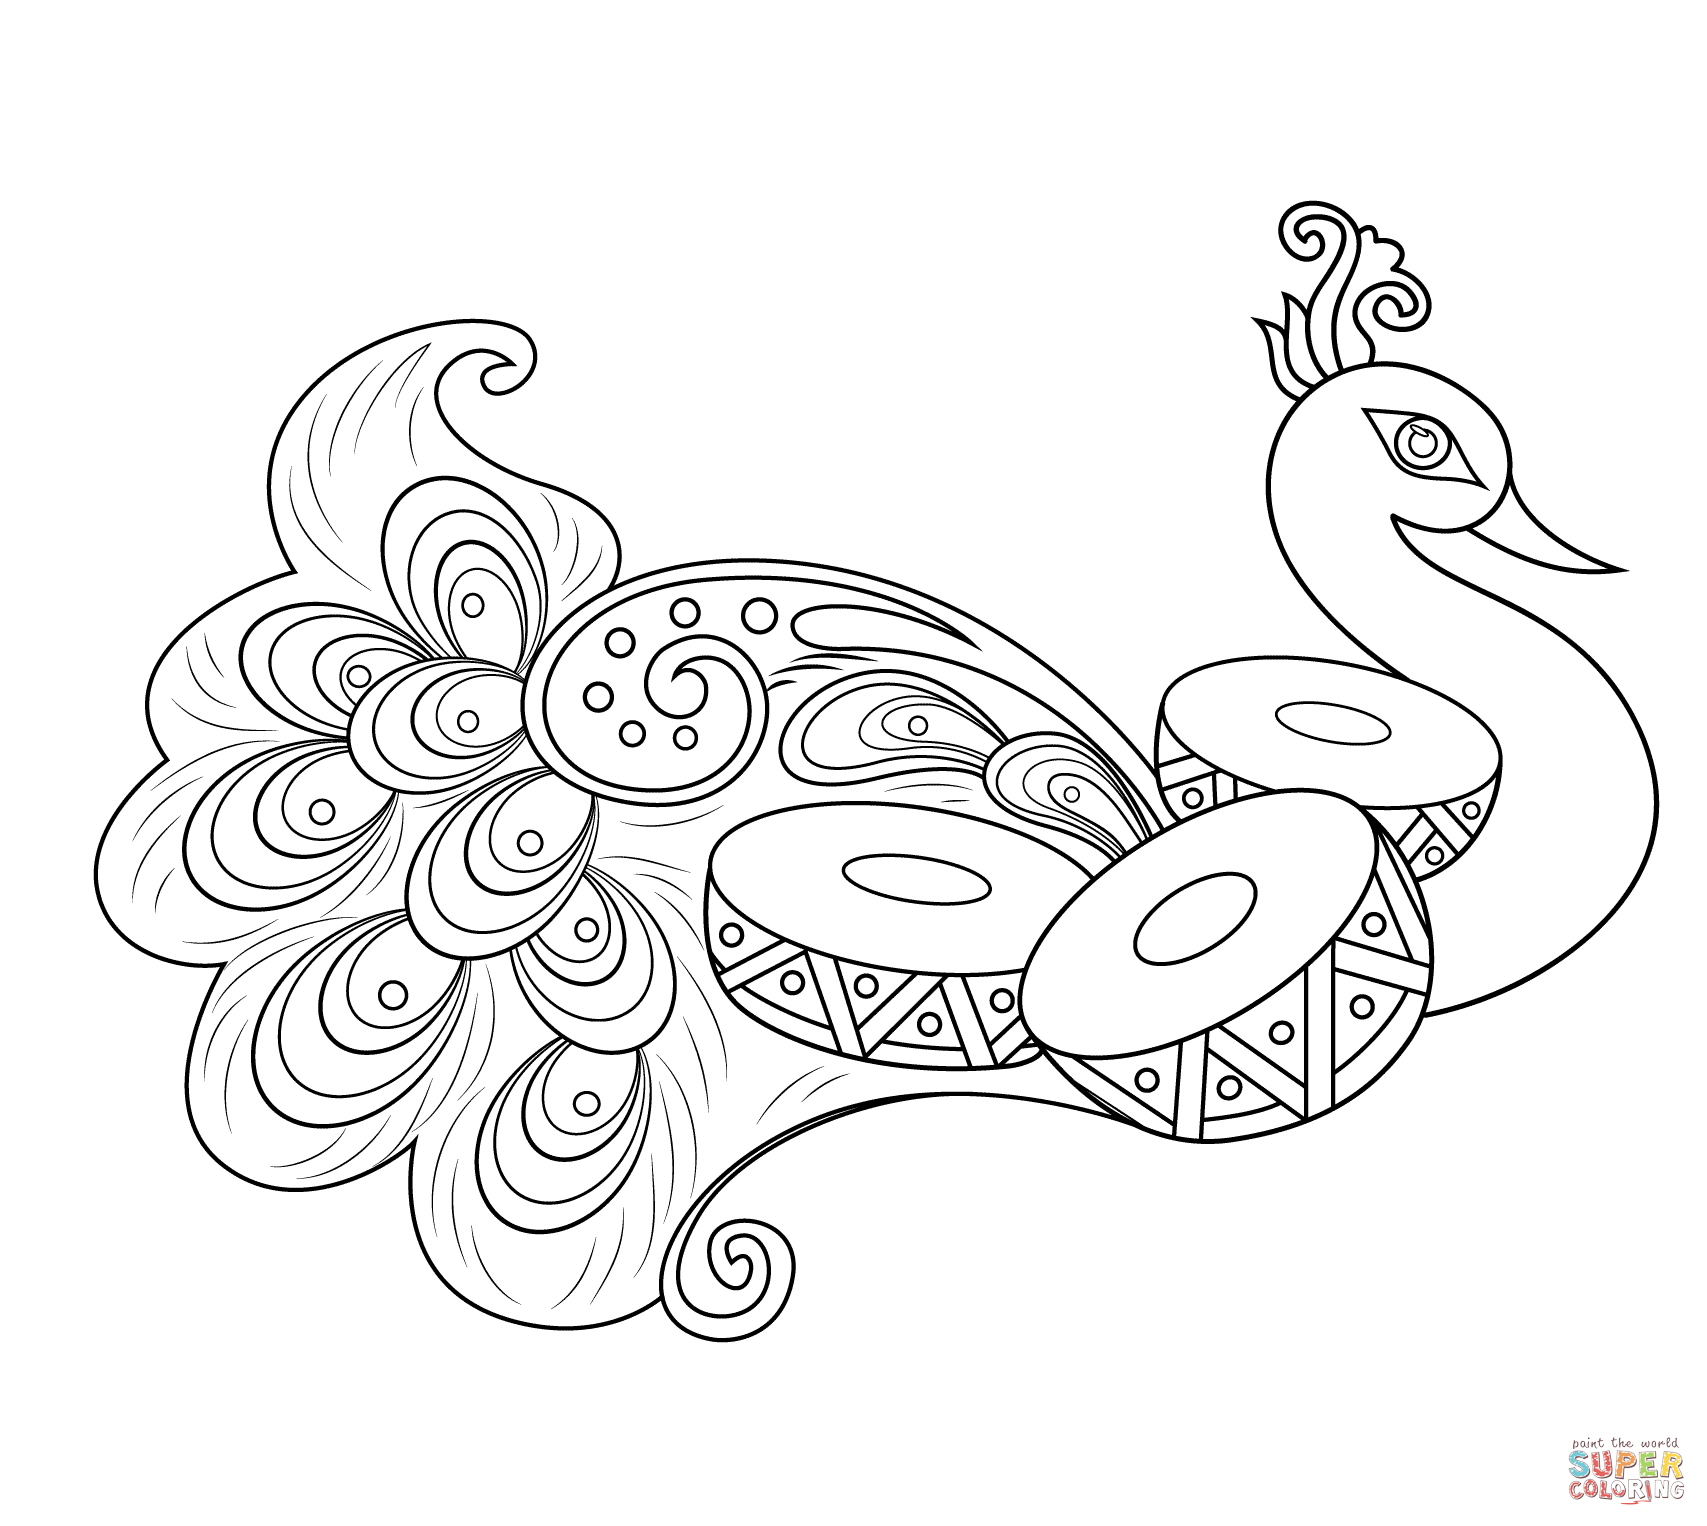 Rangoli with peacock coloring page free printable coloring pages